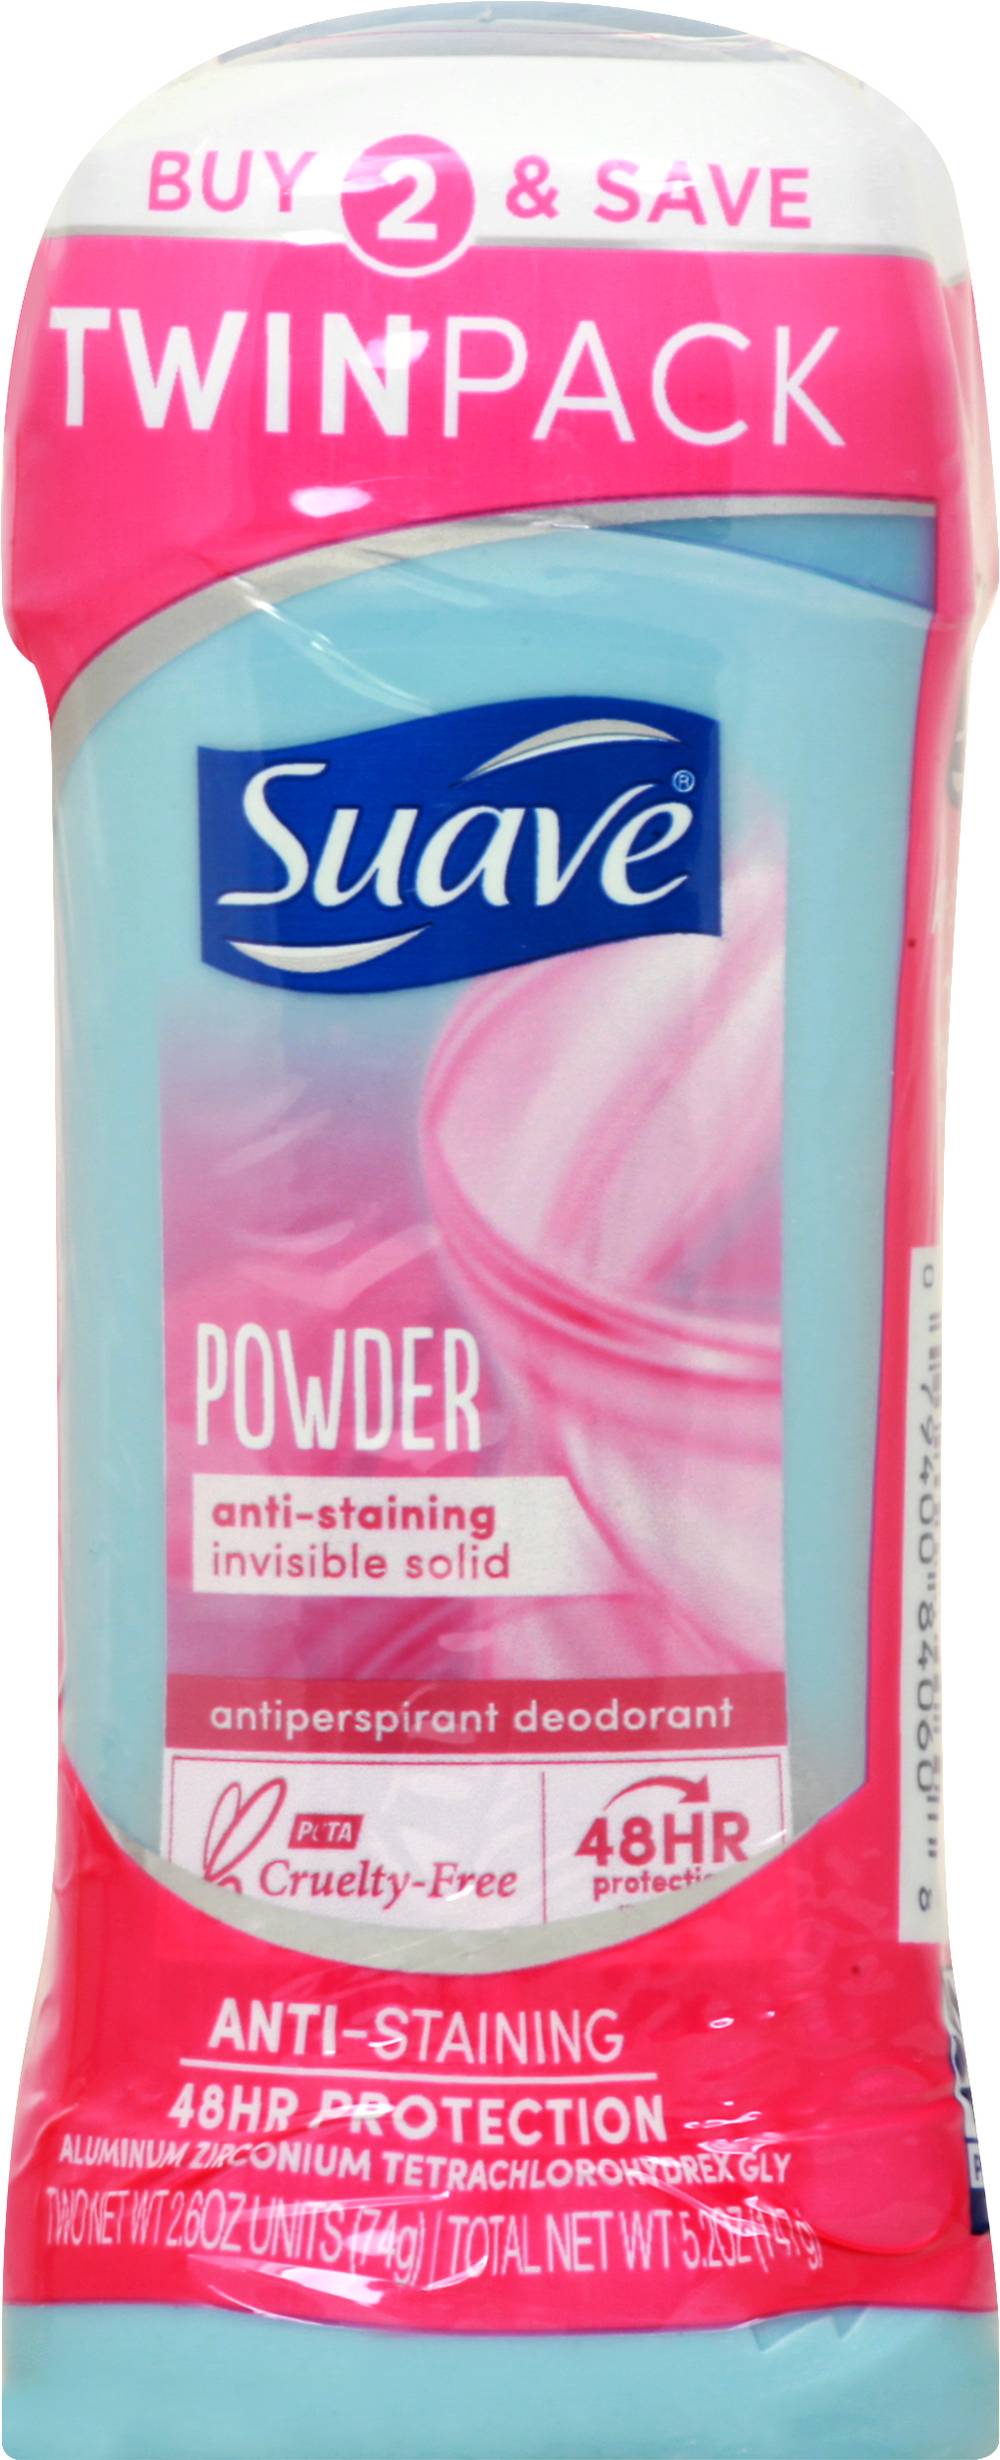 Suave Invisible Solid Powder 24 Hour Protection Antiperspirant Deodorant Stick